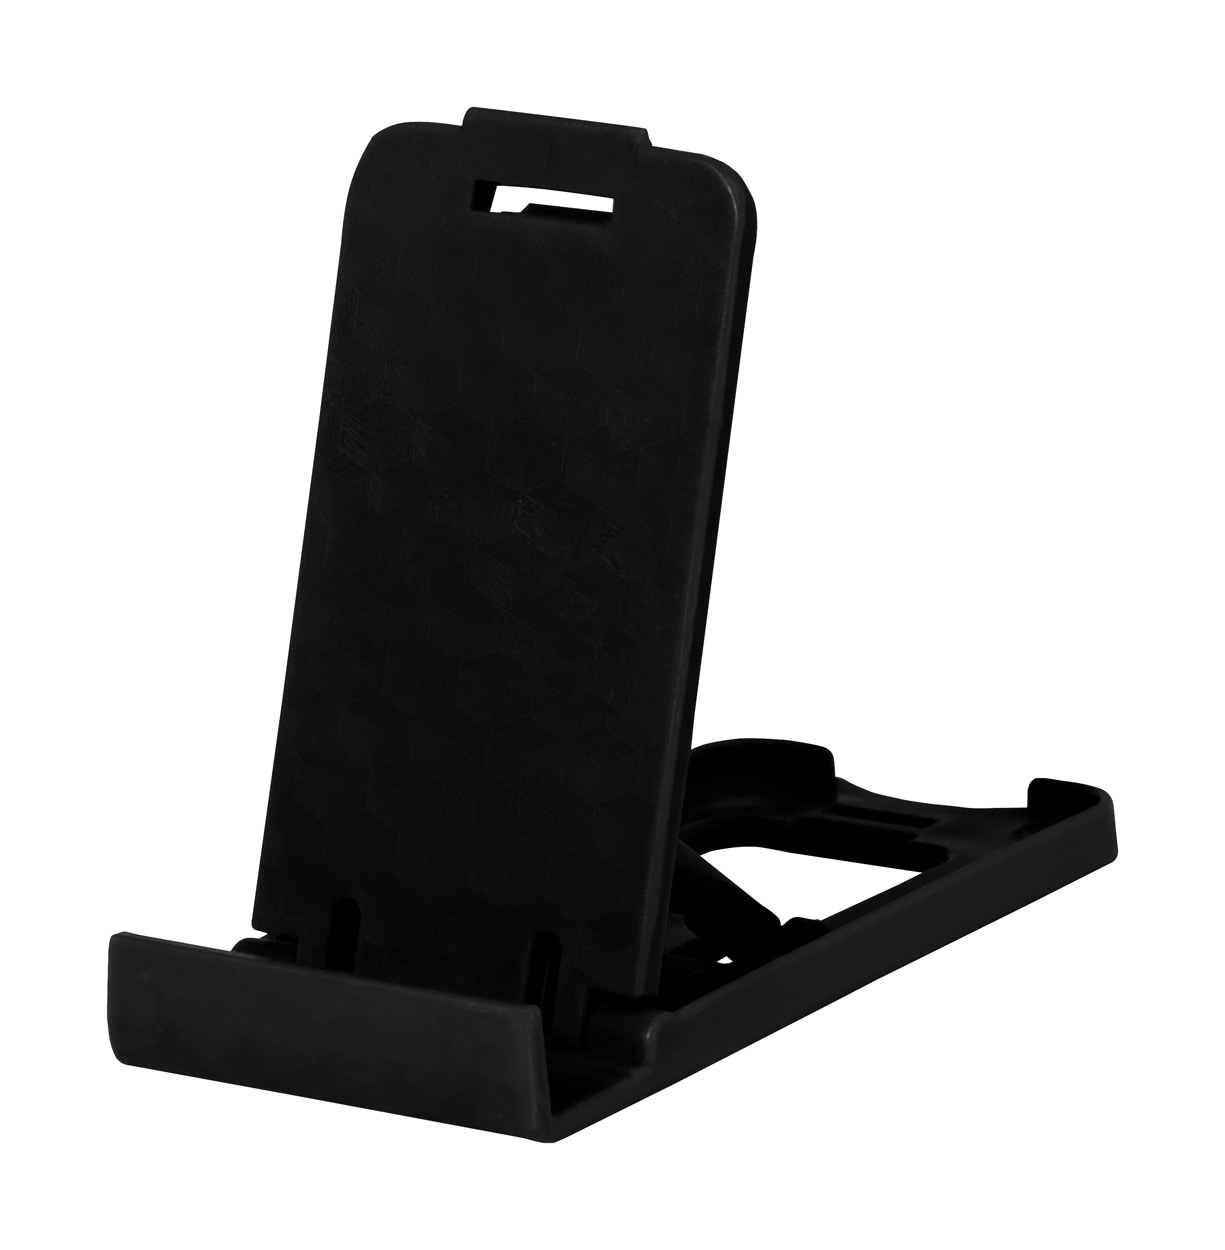 Asher mobile phone stand - black